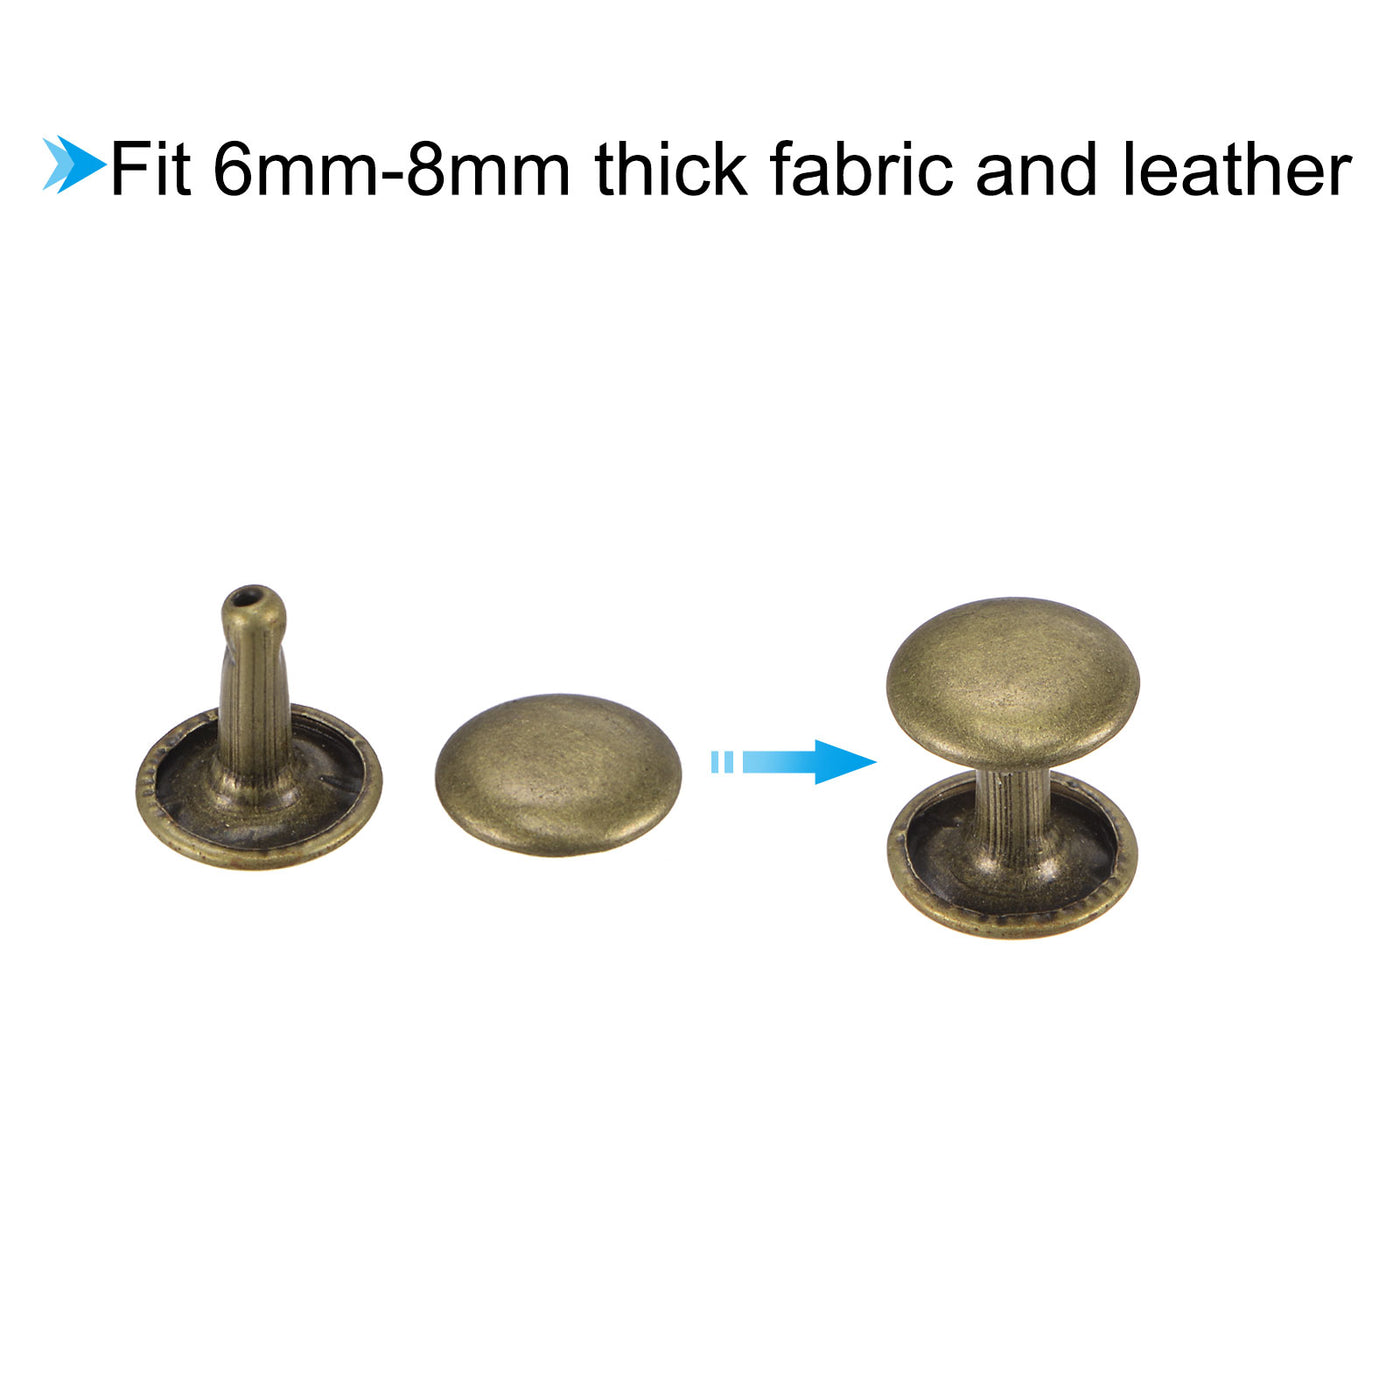 uxcell Uxcell 50 Sets Leather Rivets Bronze Tone 10mm Double Cap Brass Rivet Leather Studs